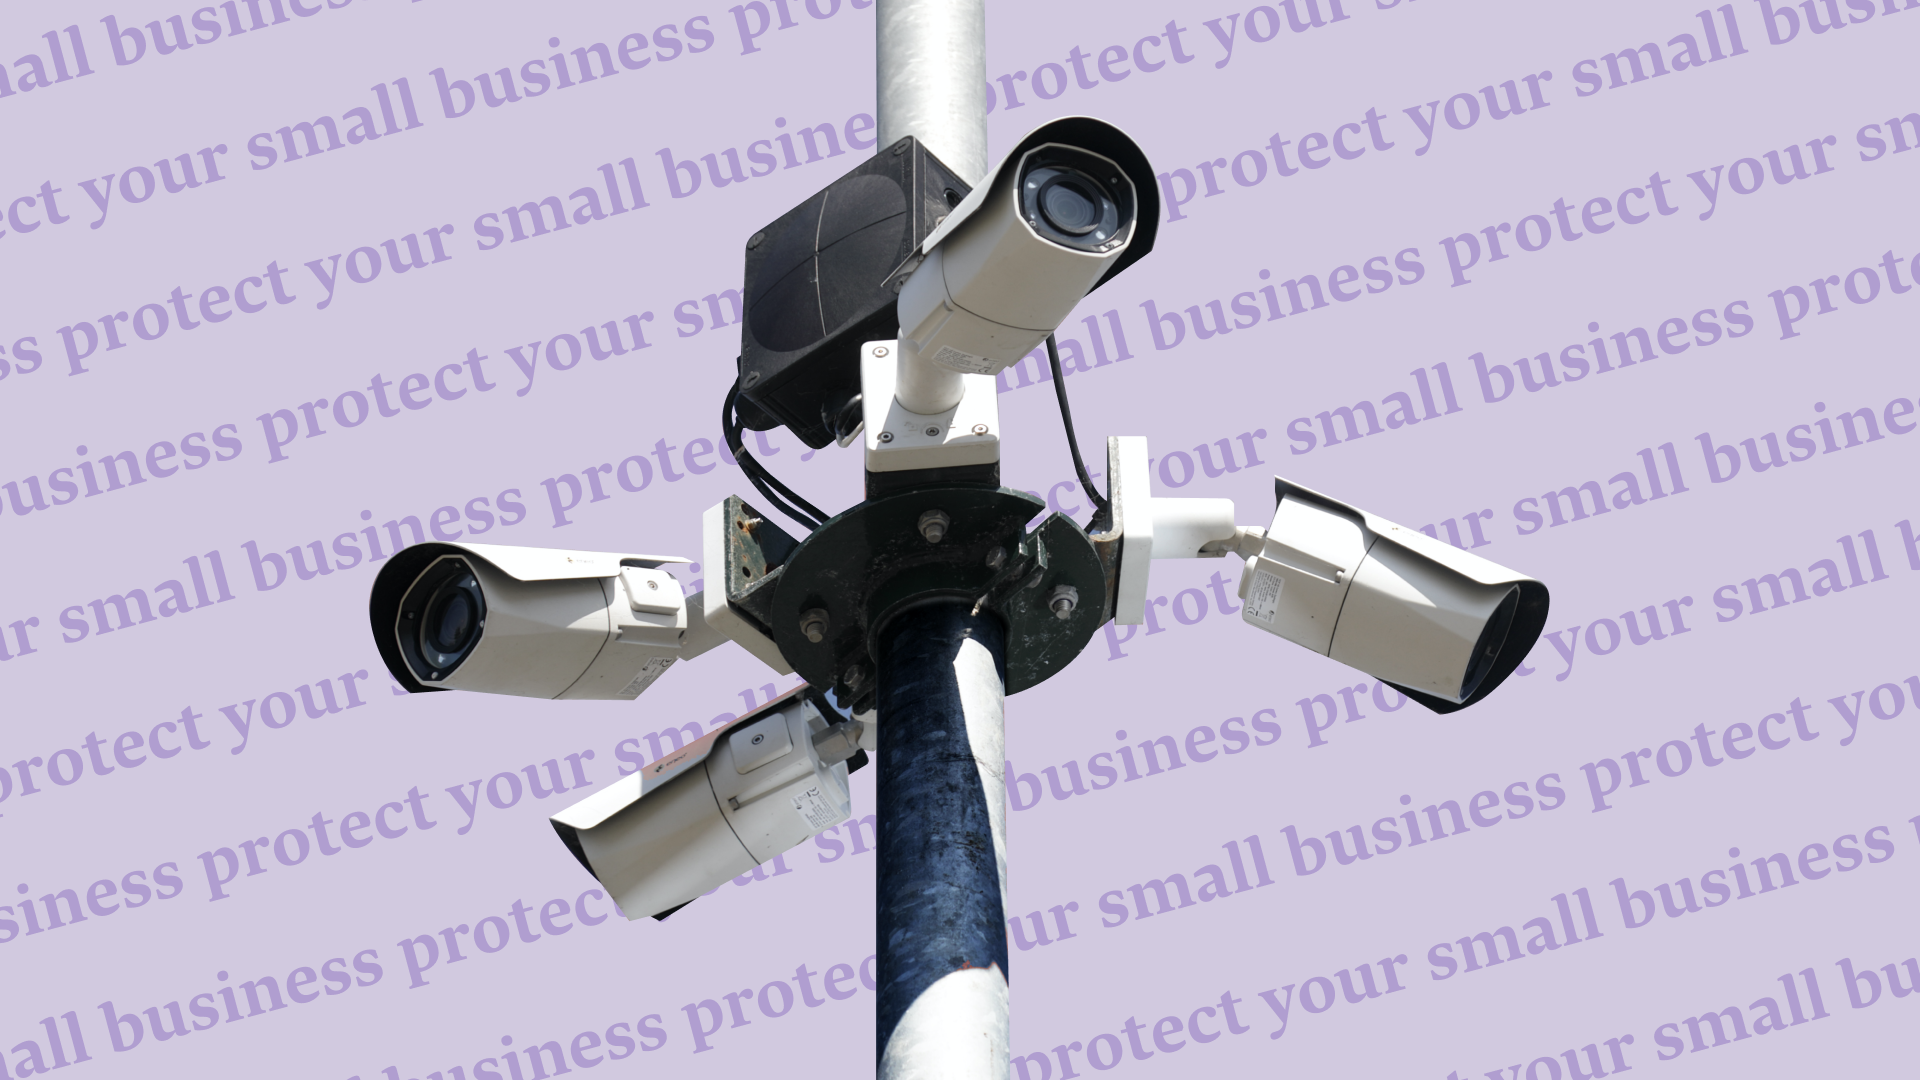 Blog - Hero - Security 101: Protect Your Small Business with These Tips